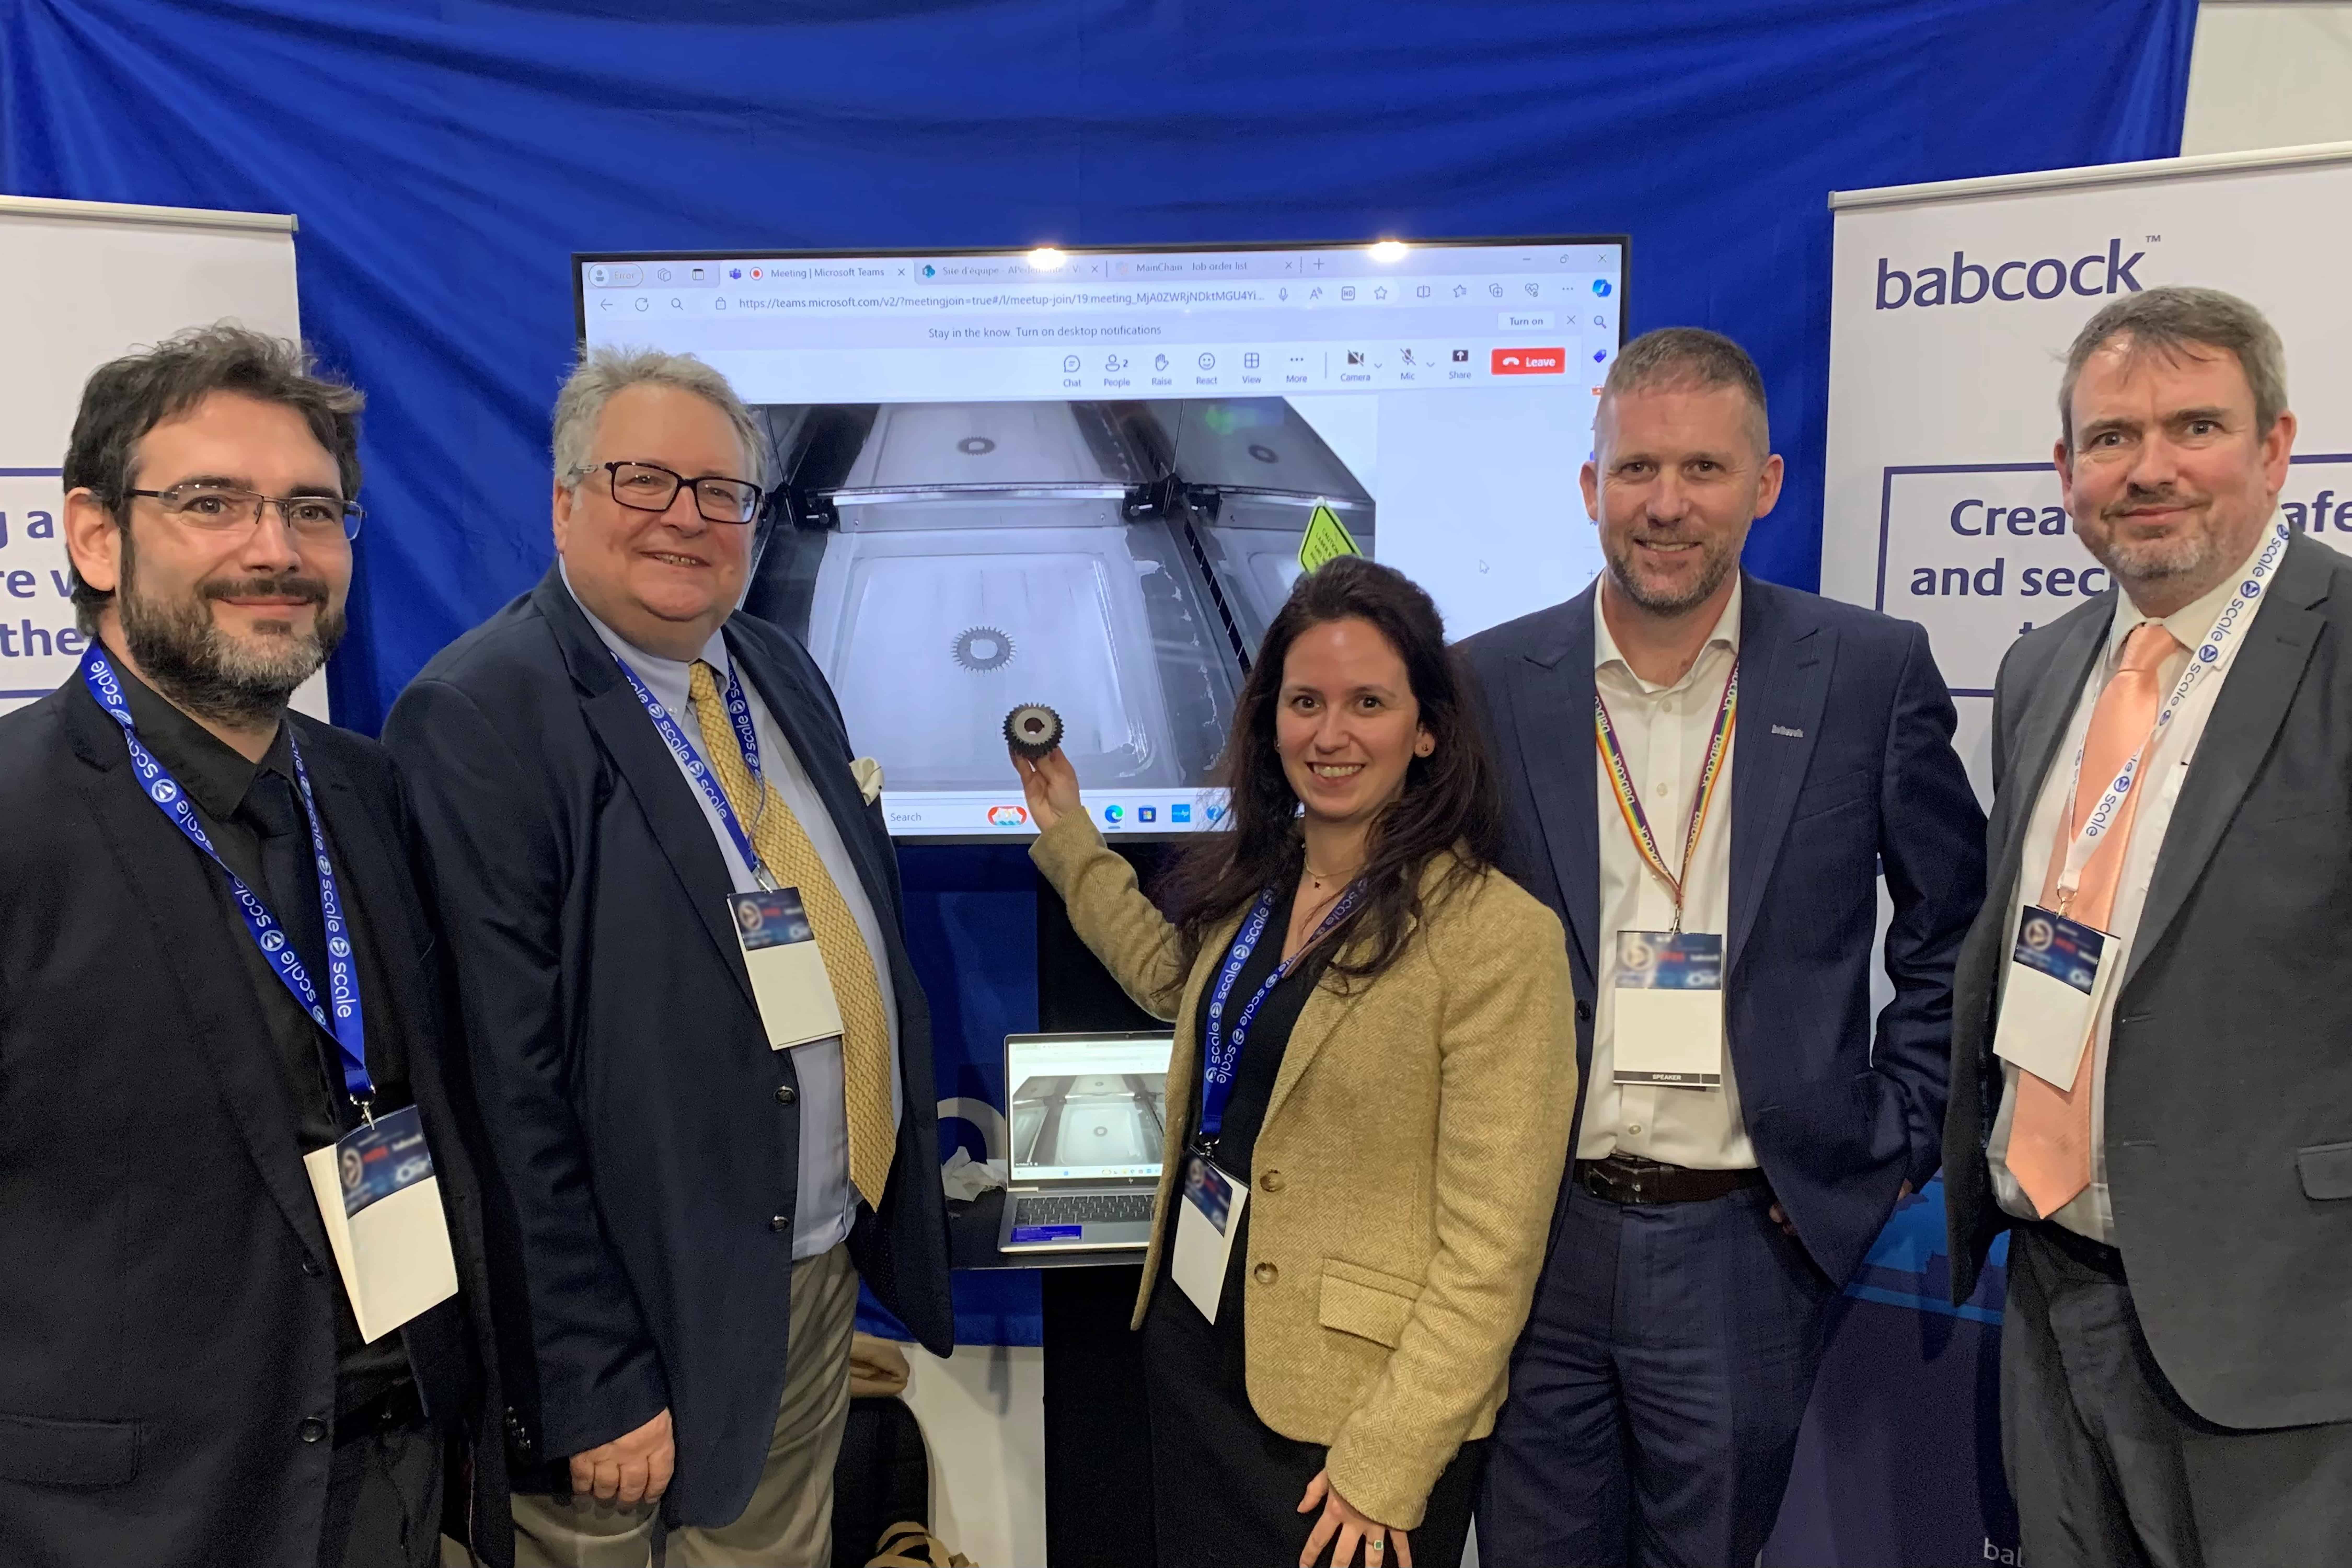 Photo of Babcock collaborative team at Defence Procurement Research Technology Exportability Conference displaying the transmission gear which was remotely manufactured at the event